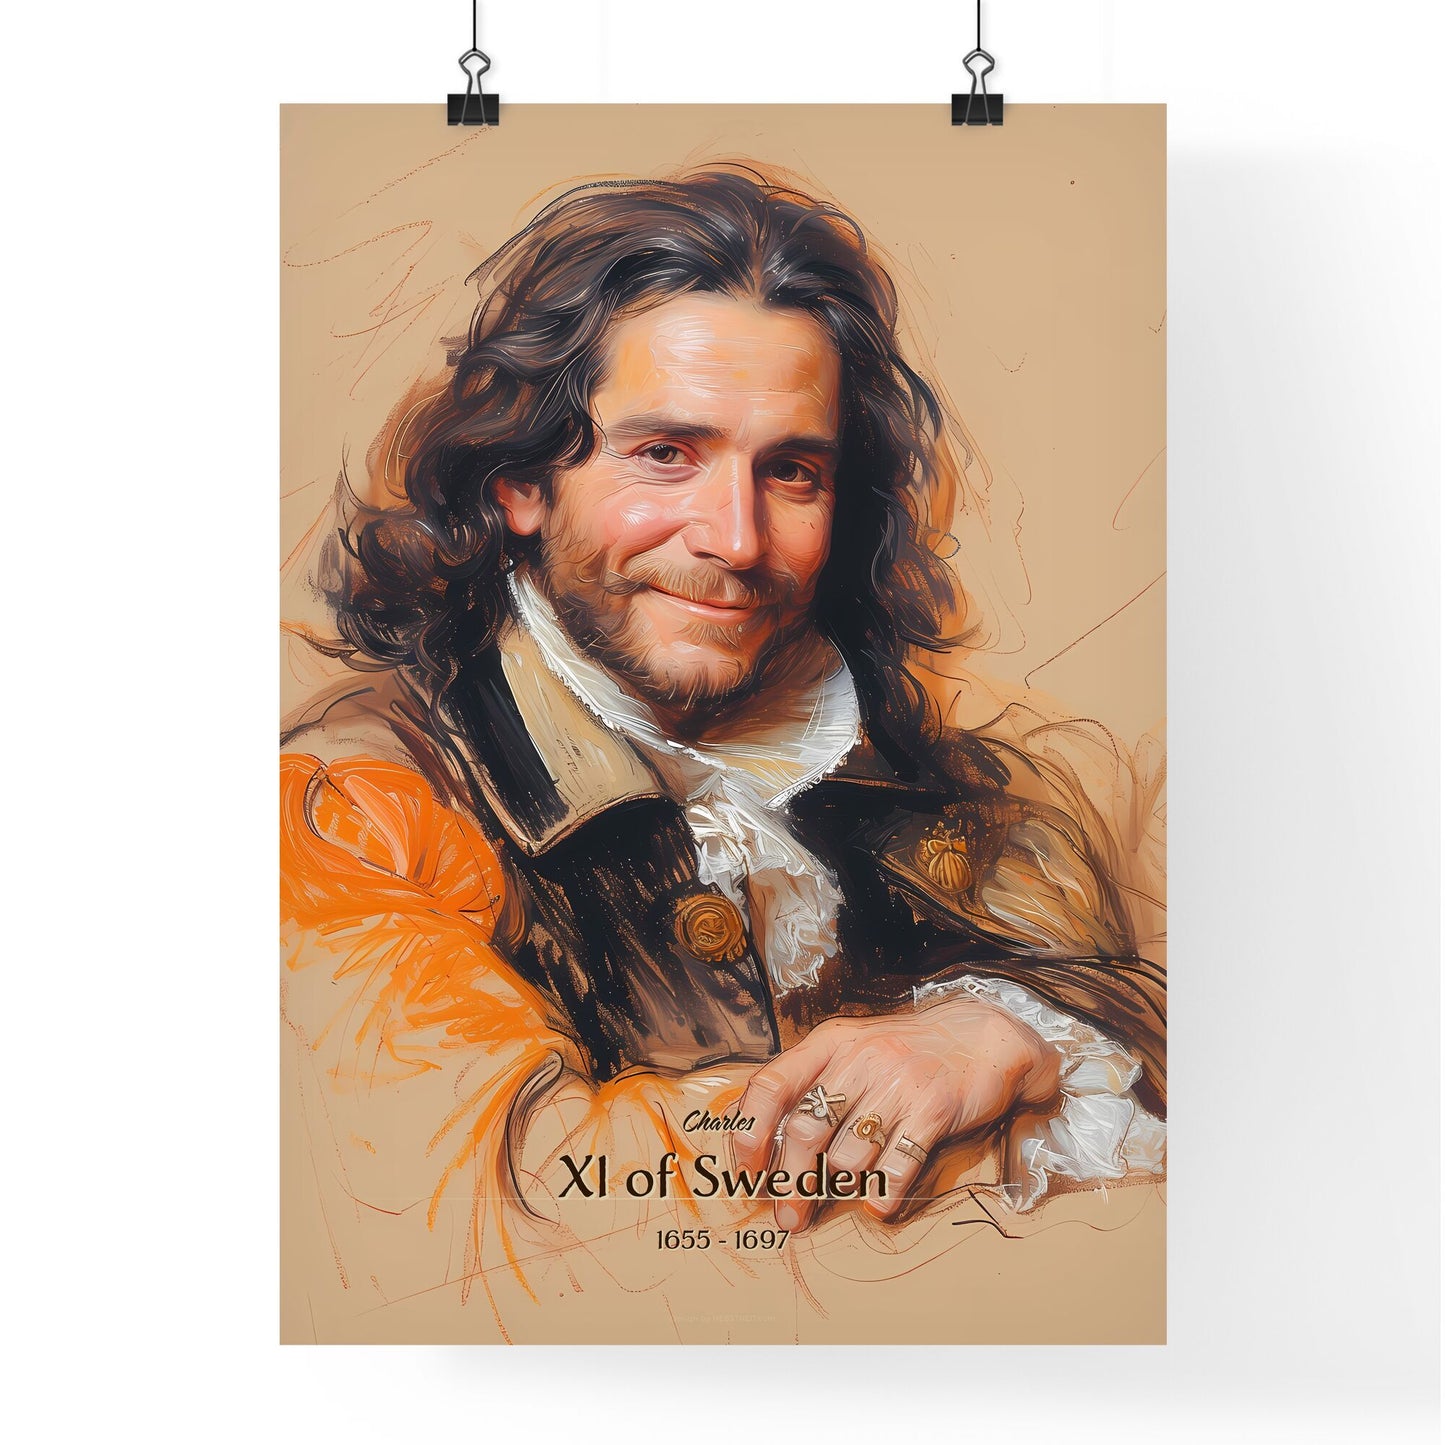 Charles, XI of Sweden, 1655 - 1697, A Poster of a man with long hair wearing a garment Default Title